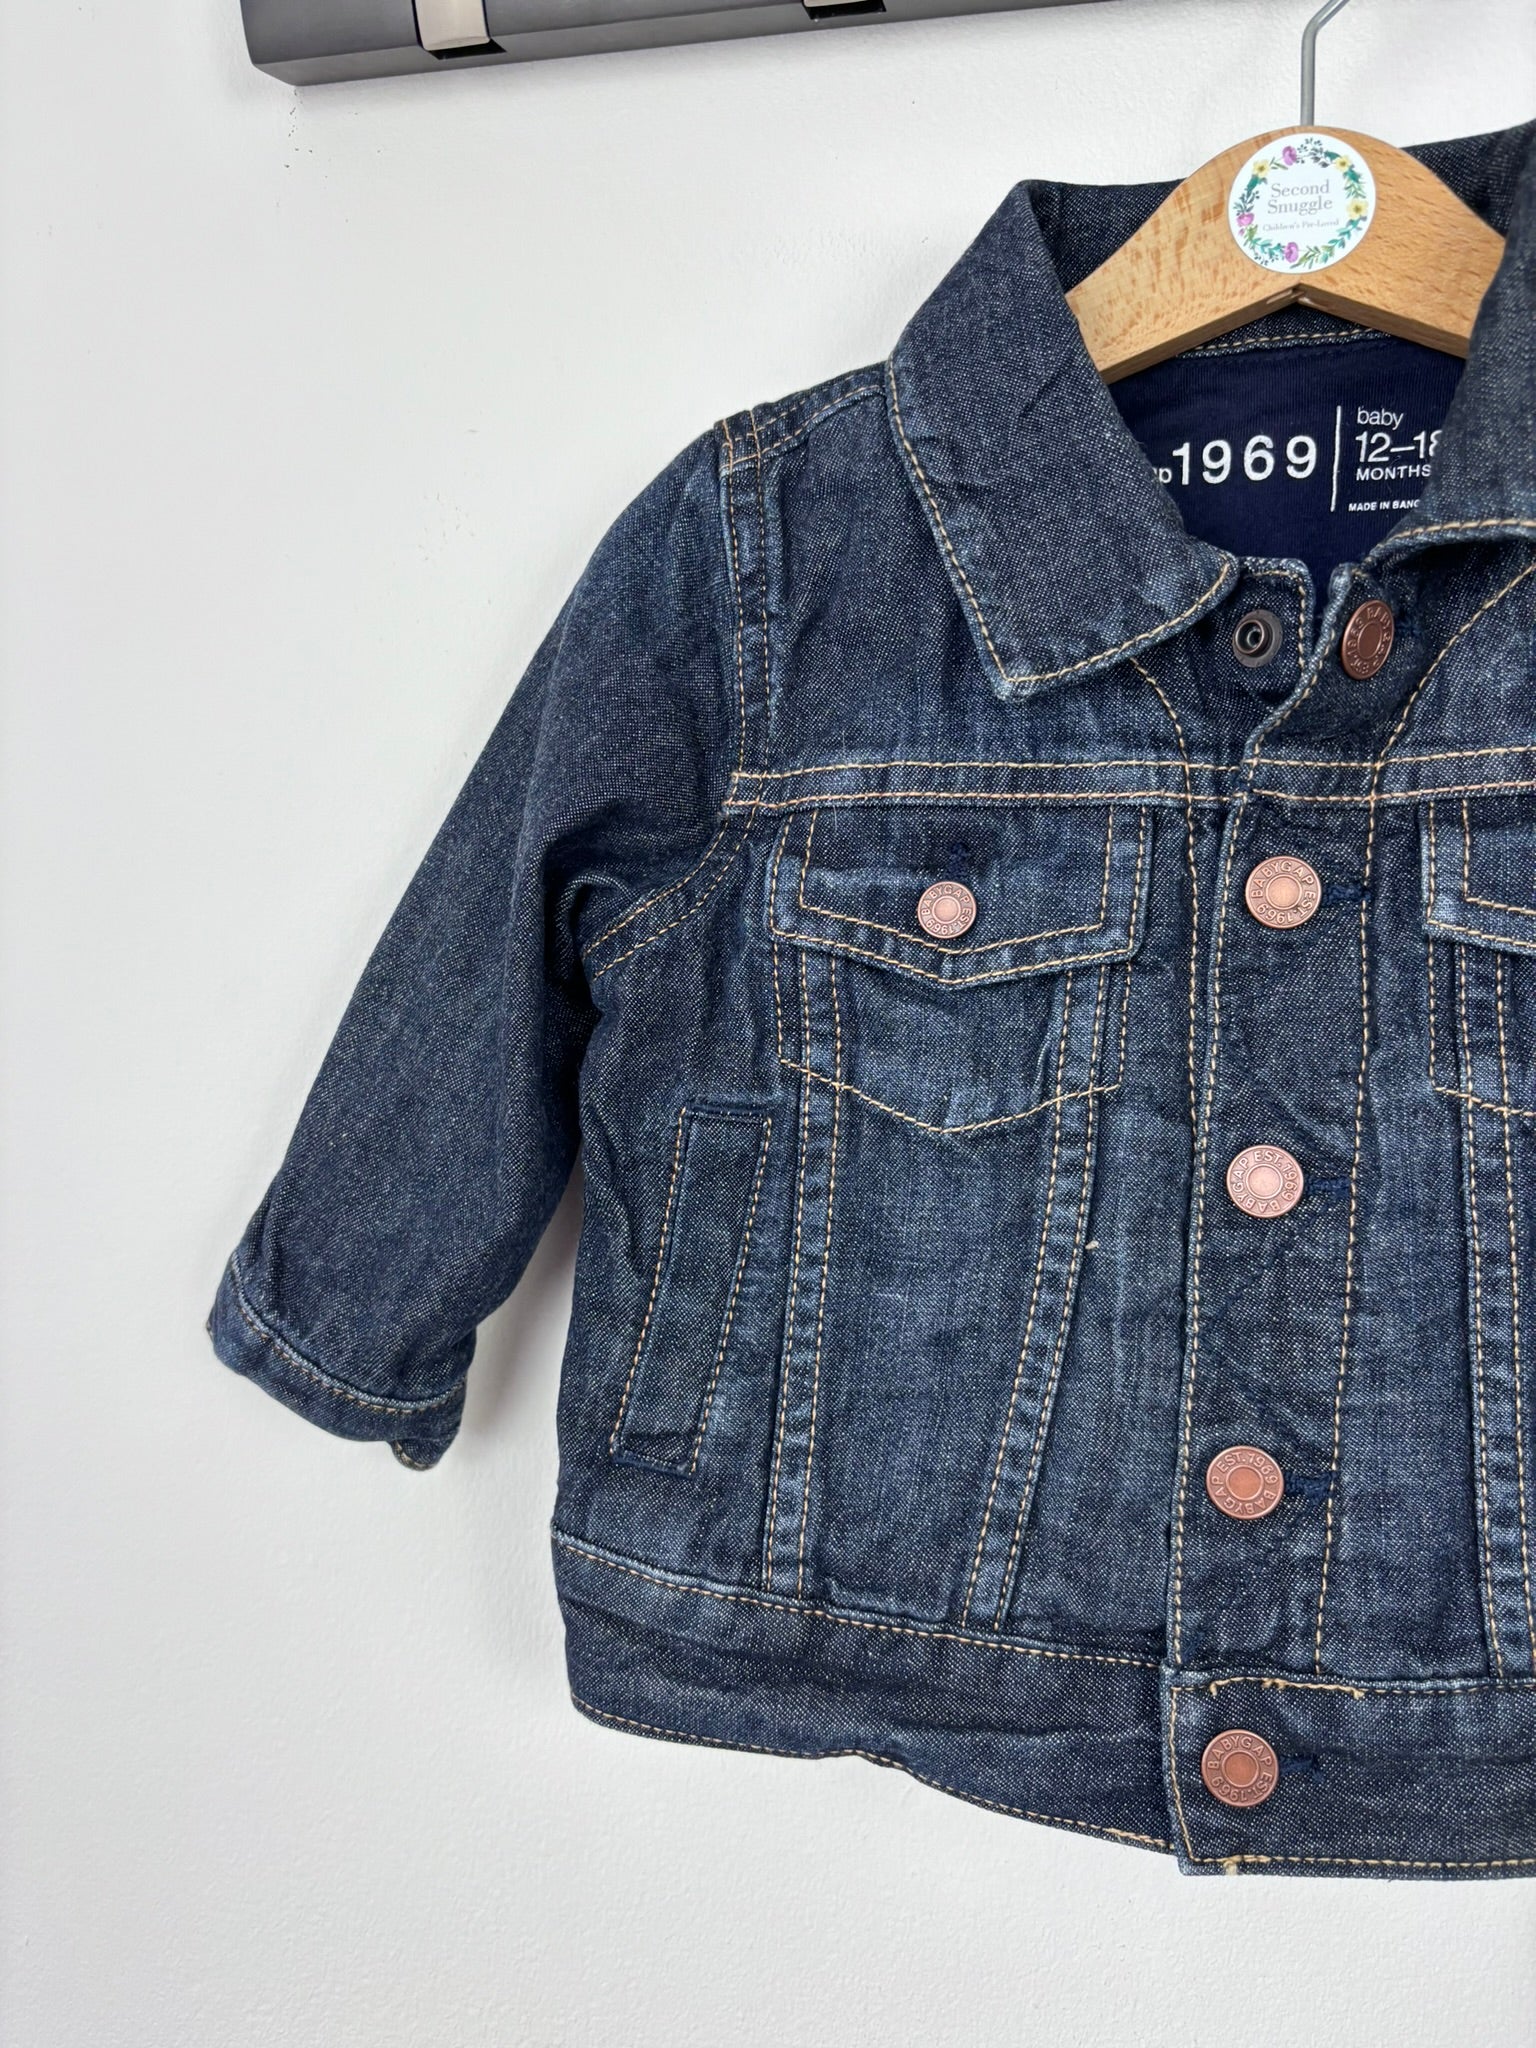 Baby Gap 12-18 Months-Jackets-Second Snuggle Preloved